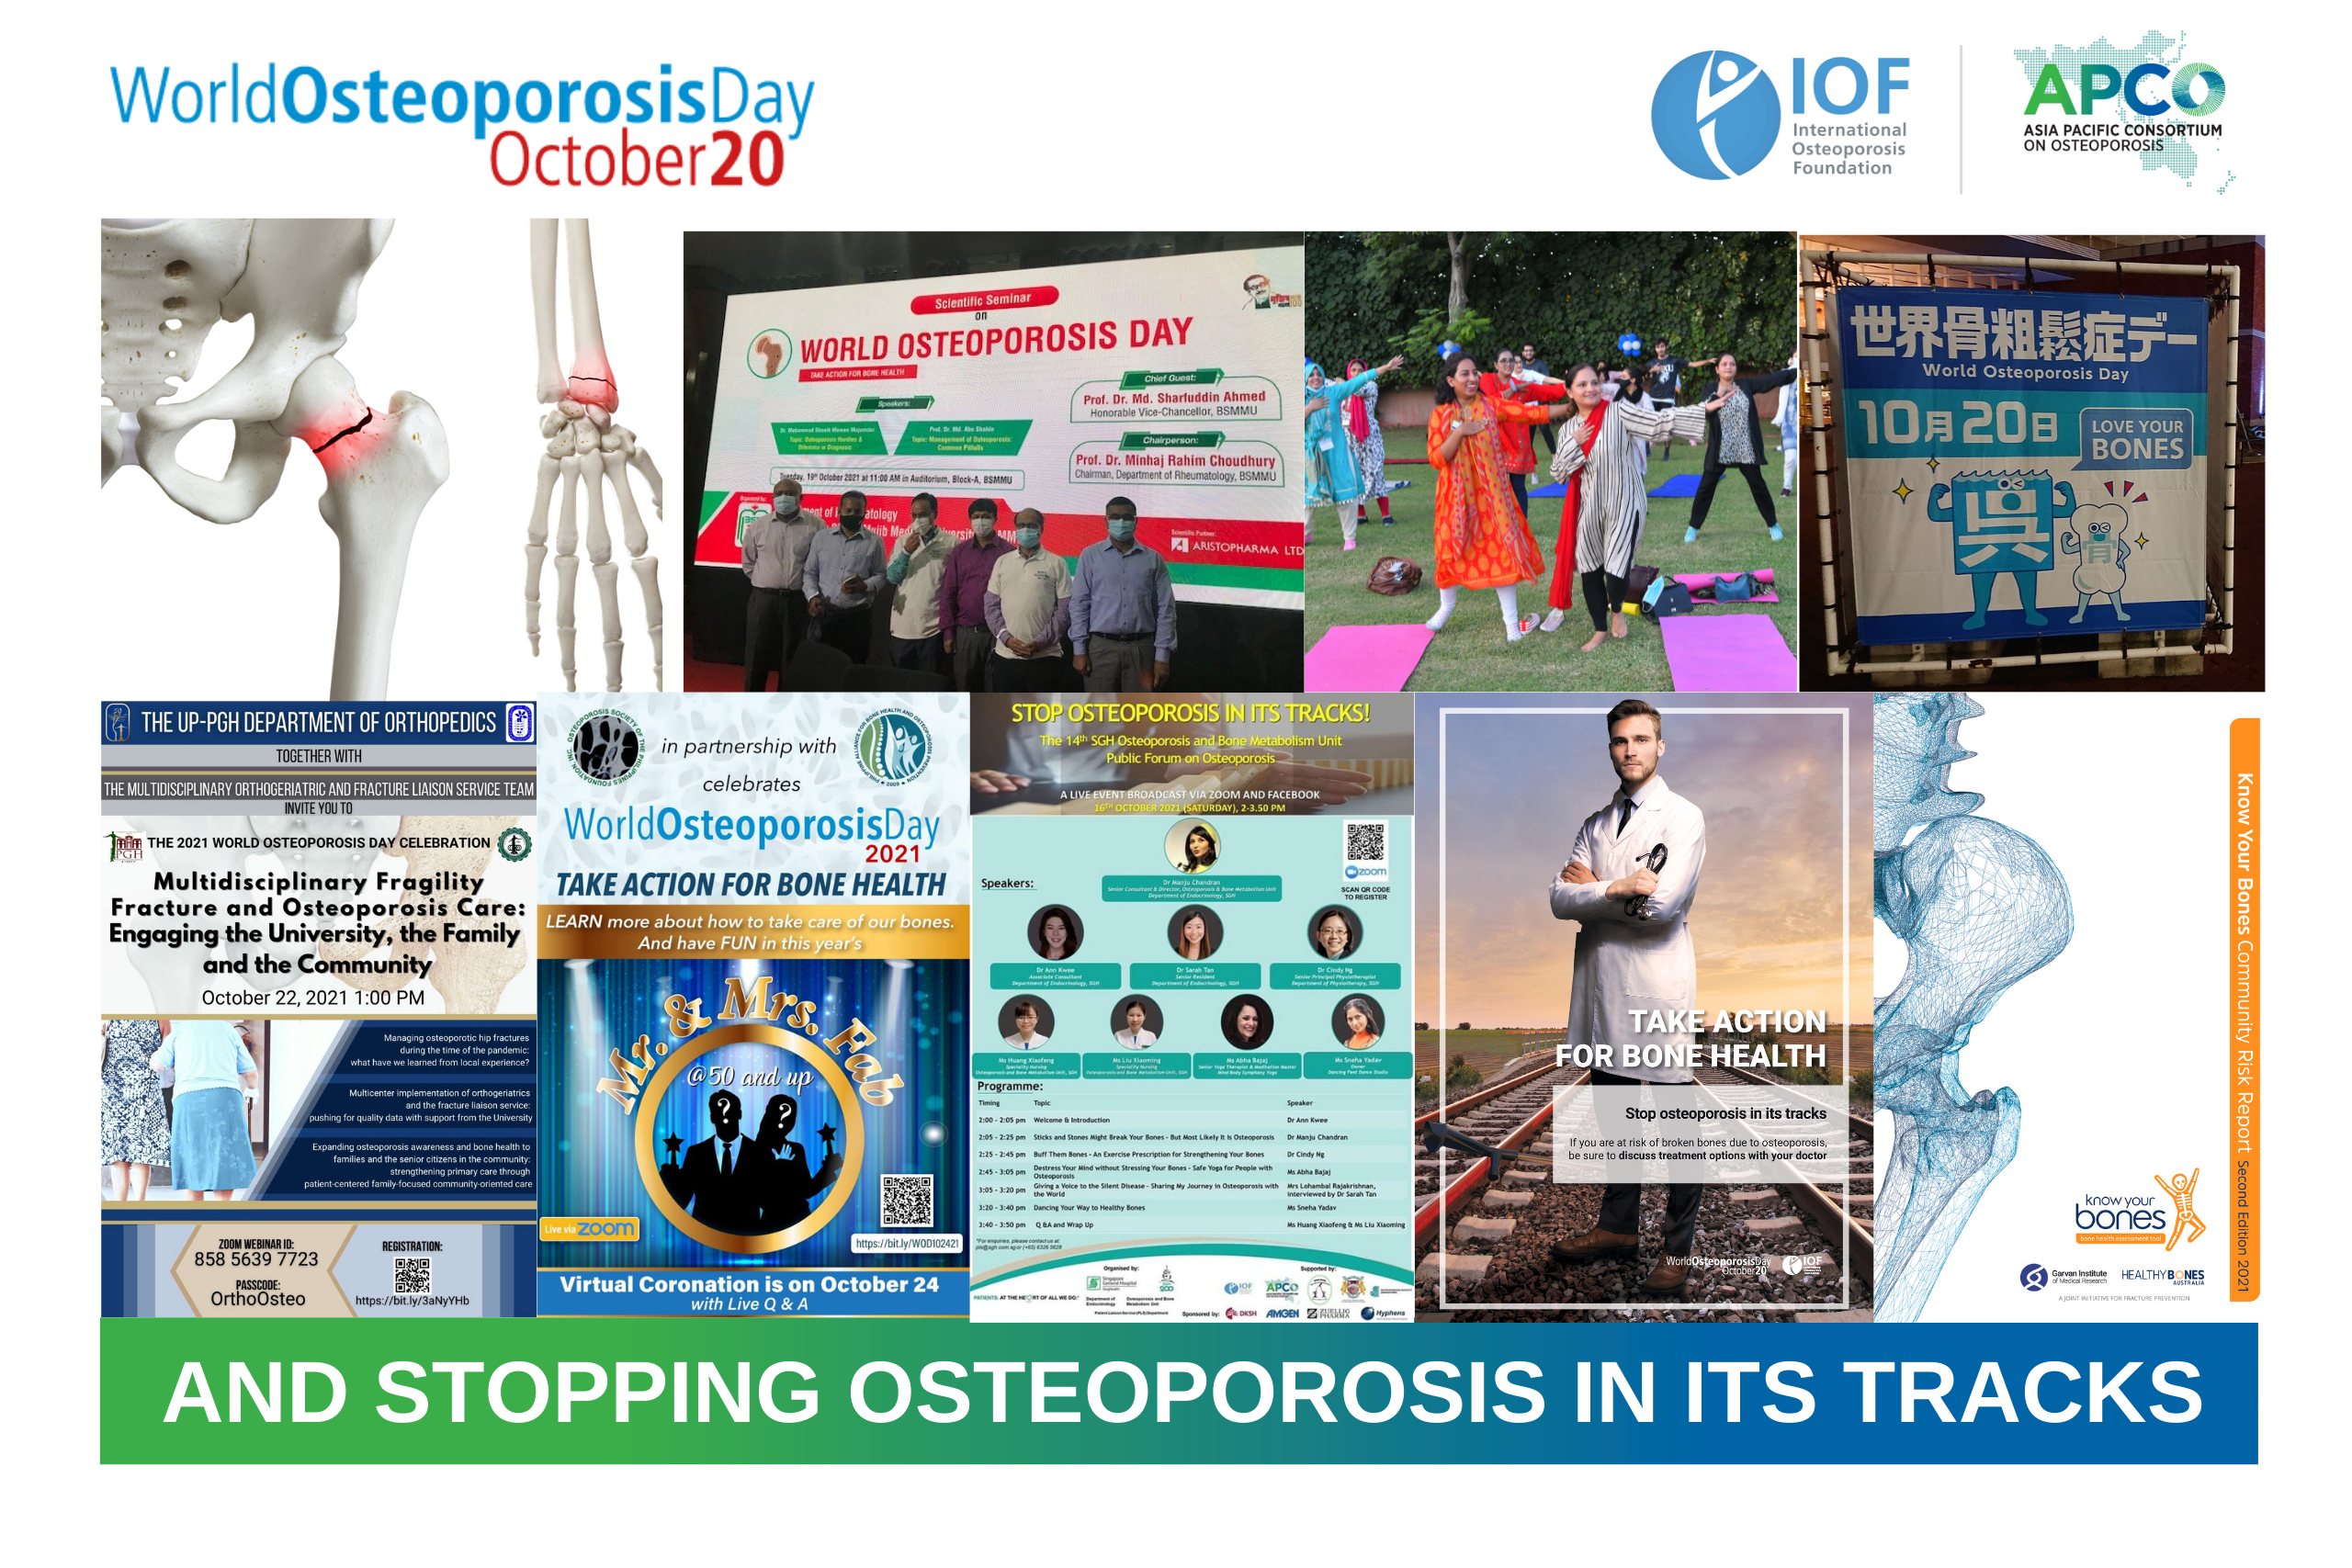 APCO 'taking action for bone health' on World Osteoporosis Day 2021 - APCO